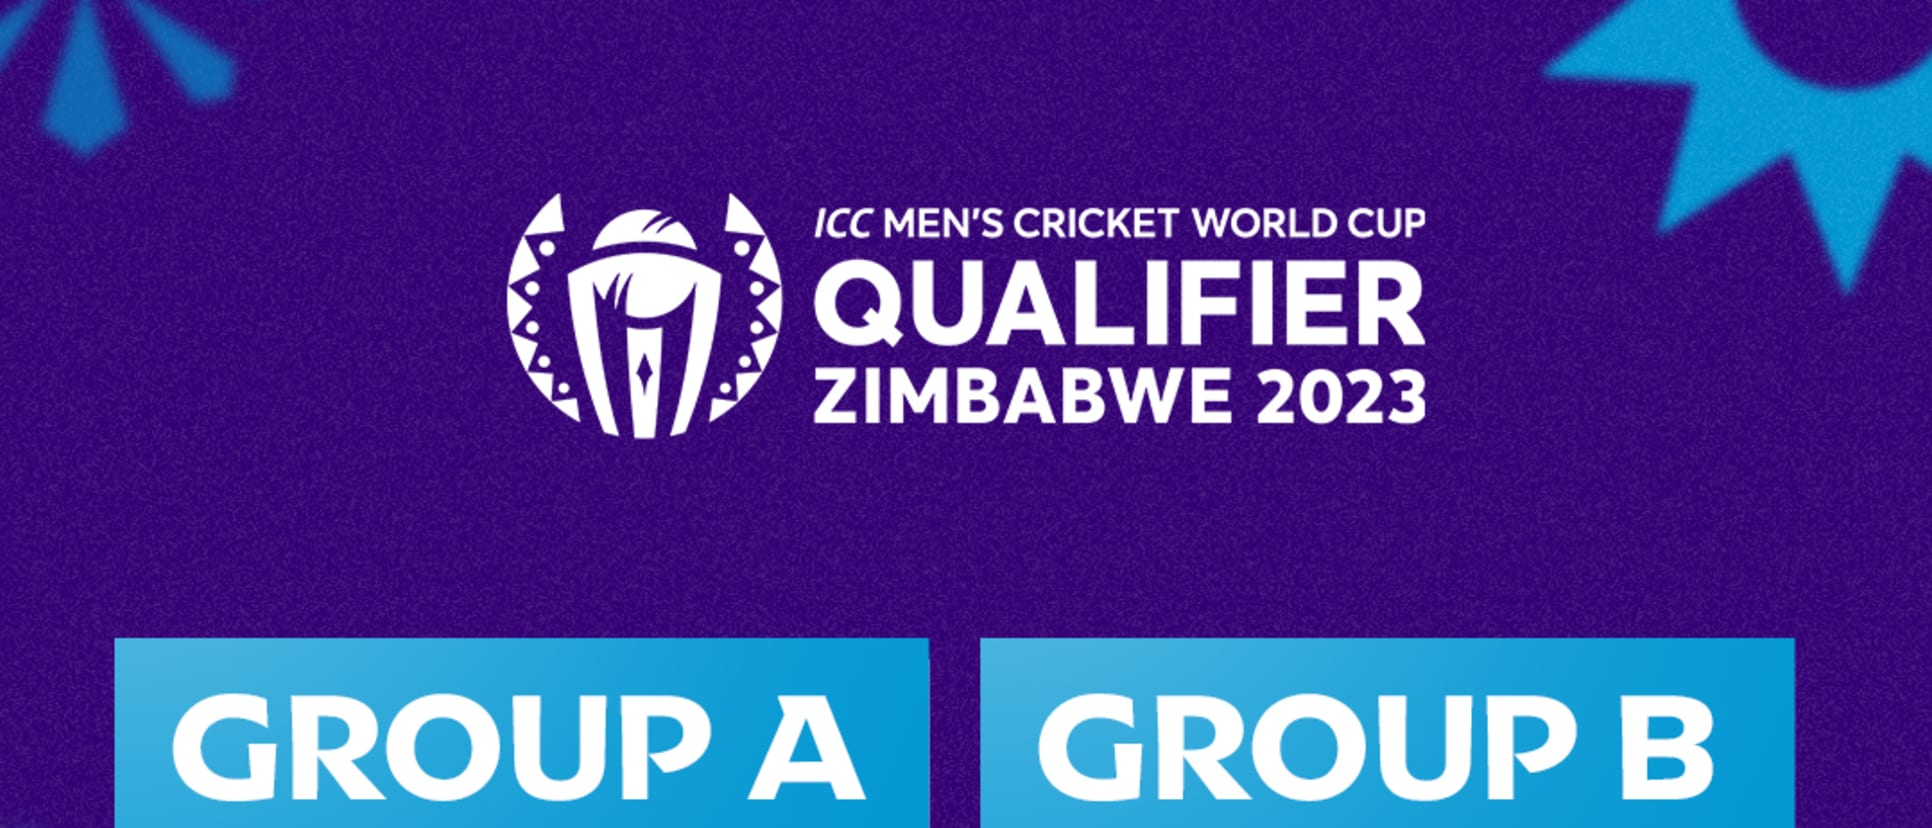 Groups for the Cricket World Cup Qualifier 2023